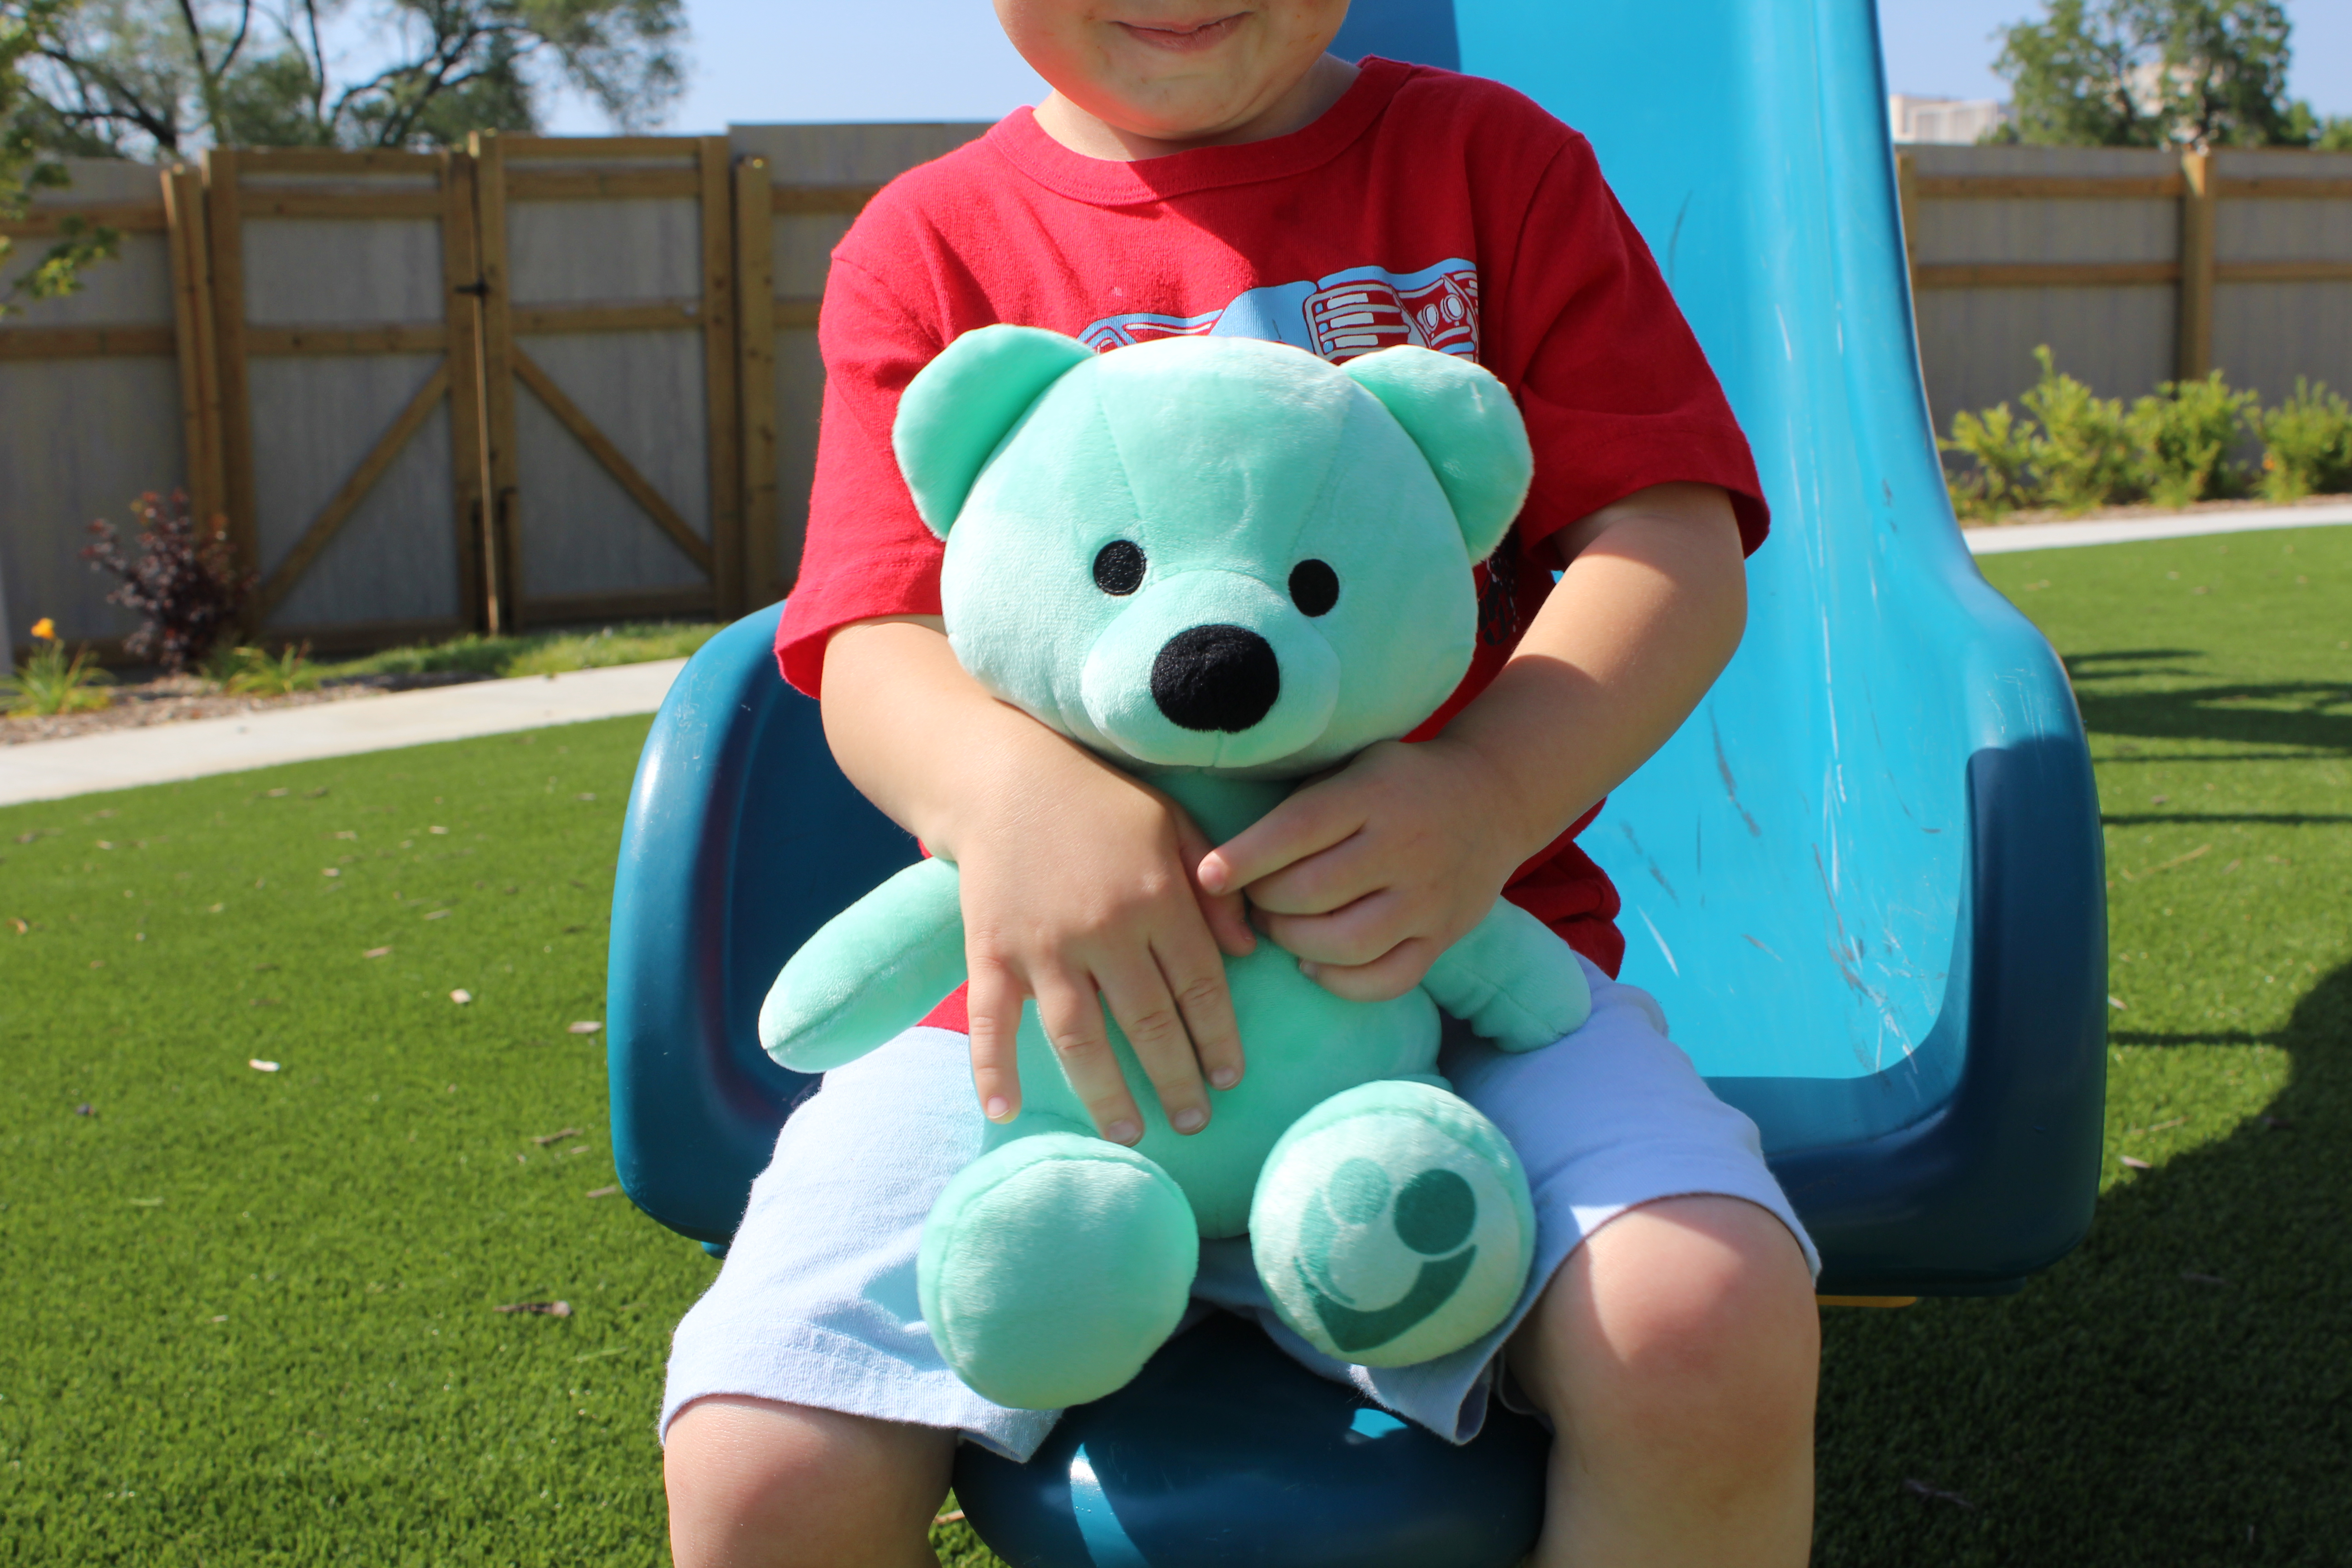 Budsies Spotlight: A Teddy Bear that Became a Symbol of Hope for Children